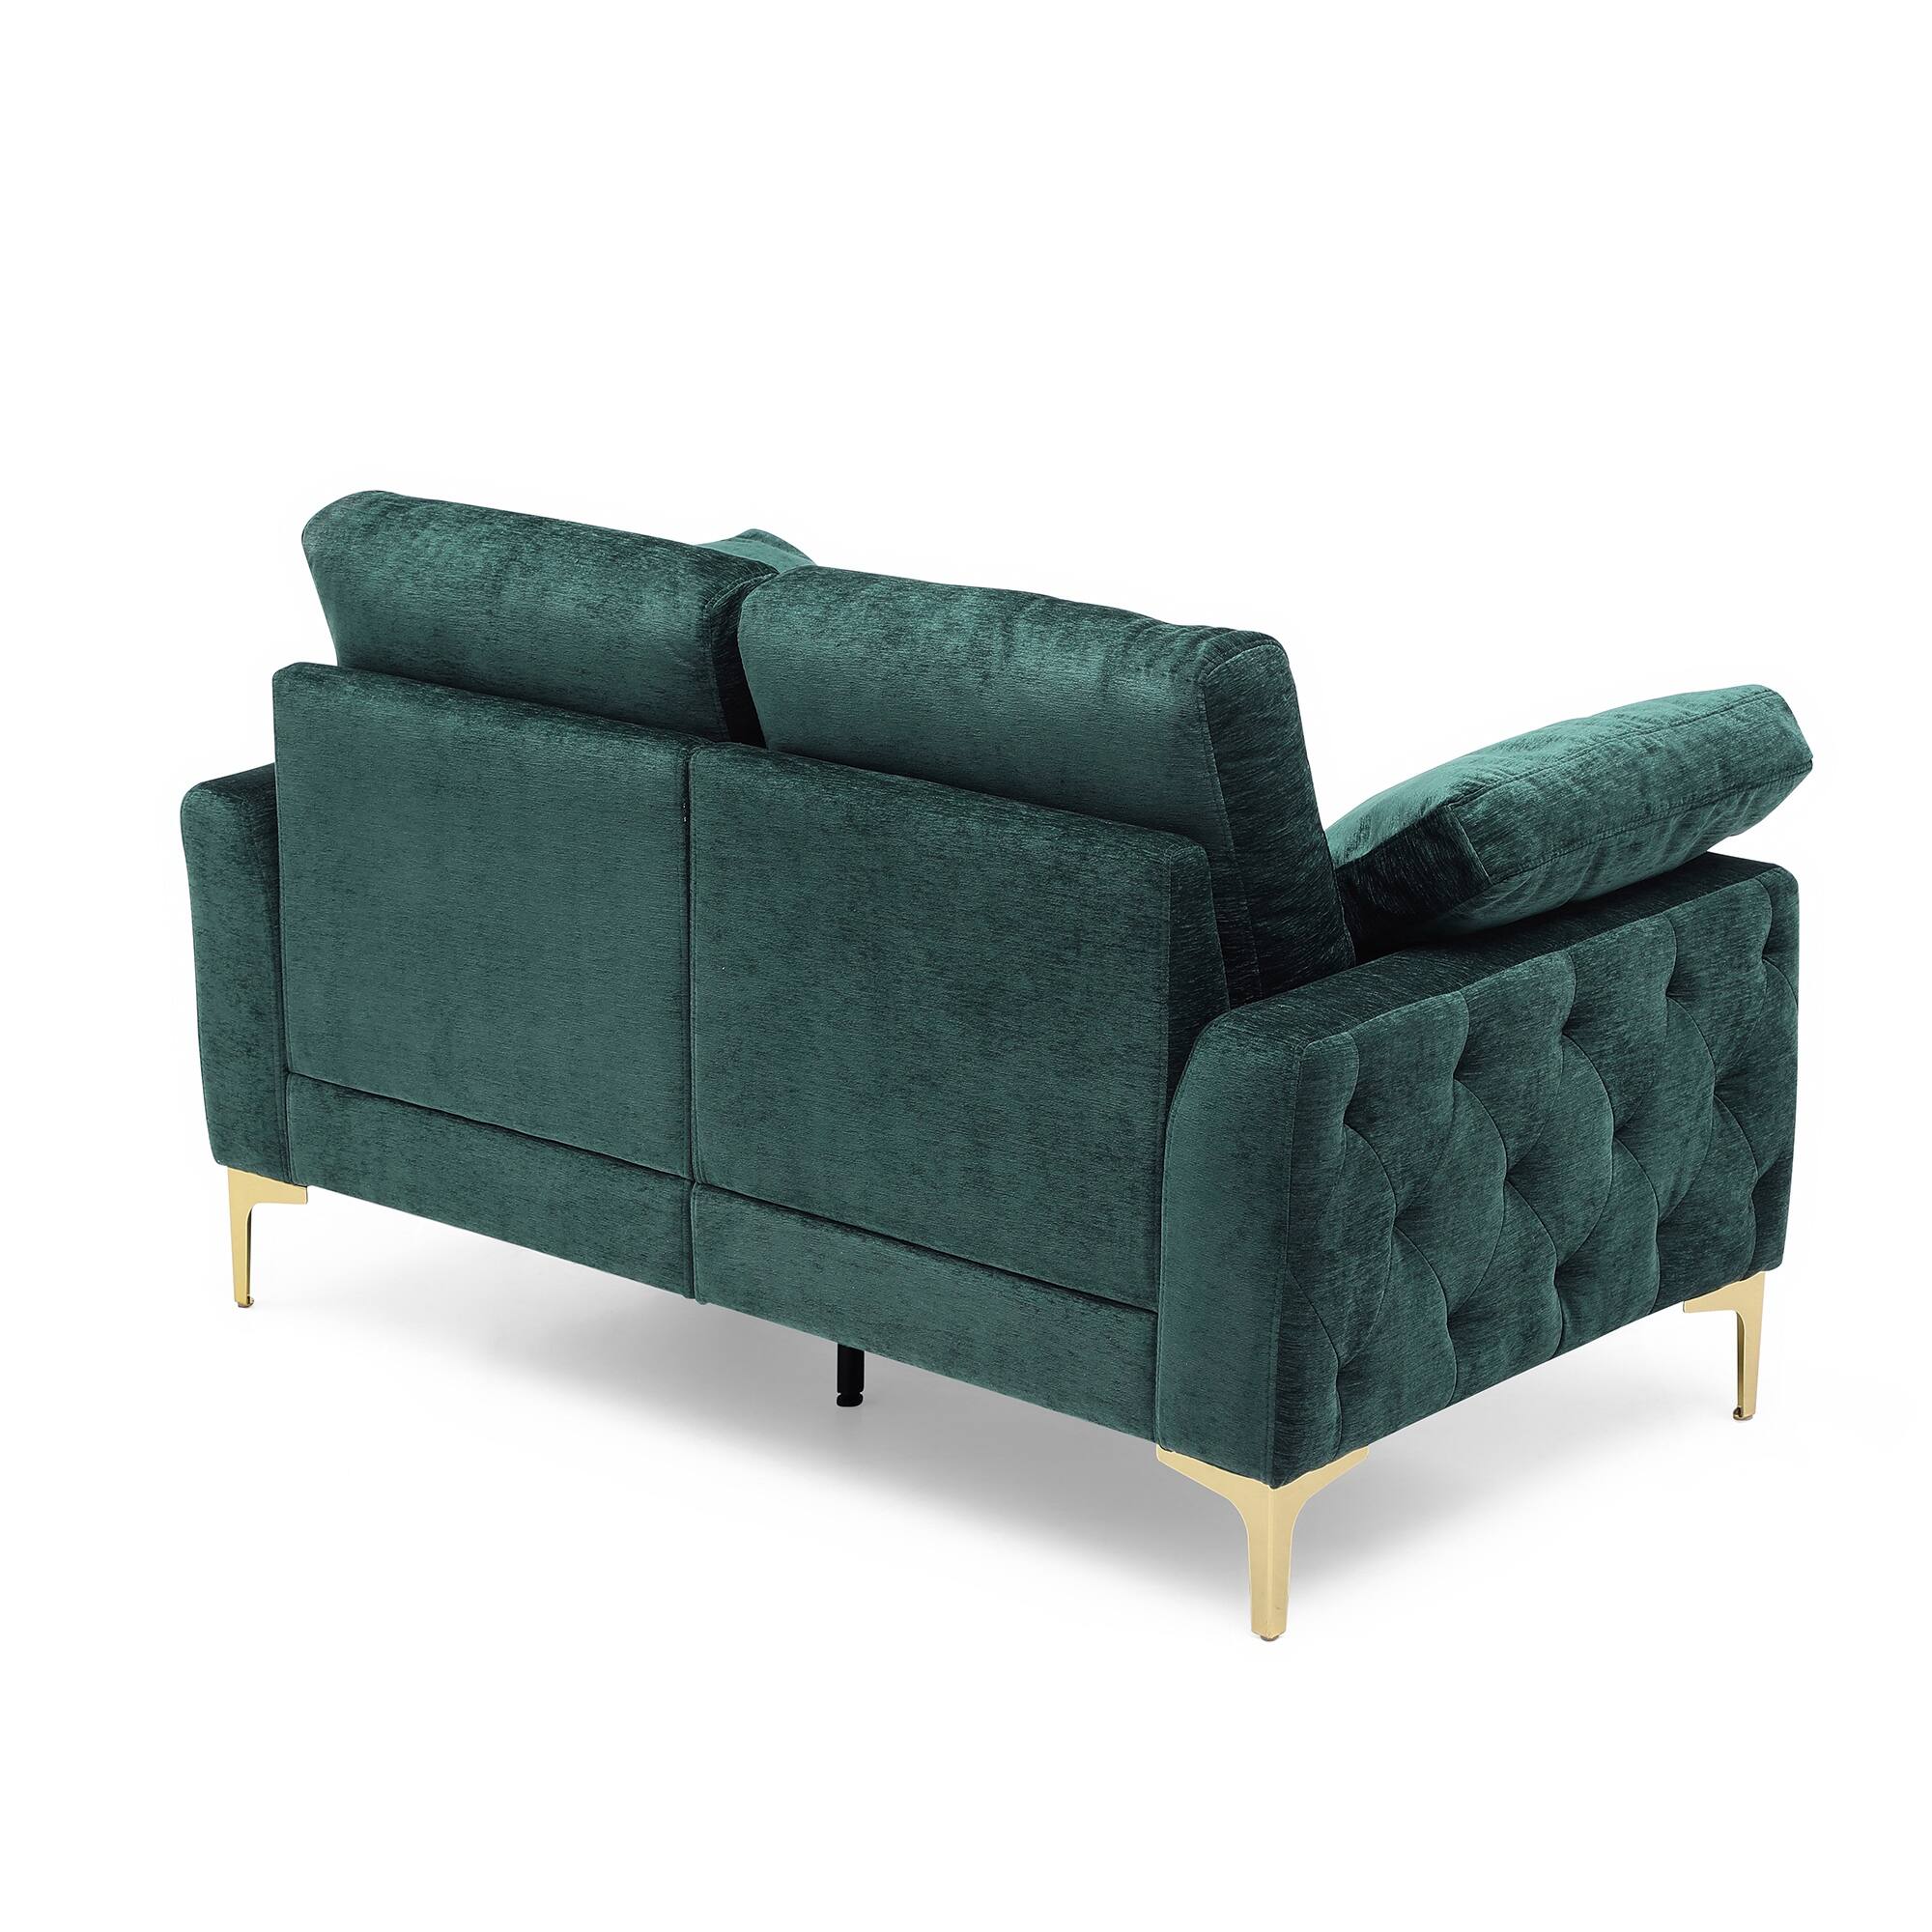 Chenille Loveseater Sofa with Cozy Elegance with Diamond Tufting and ...